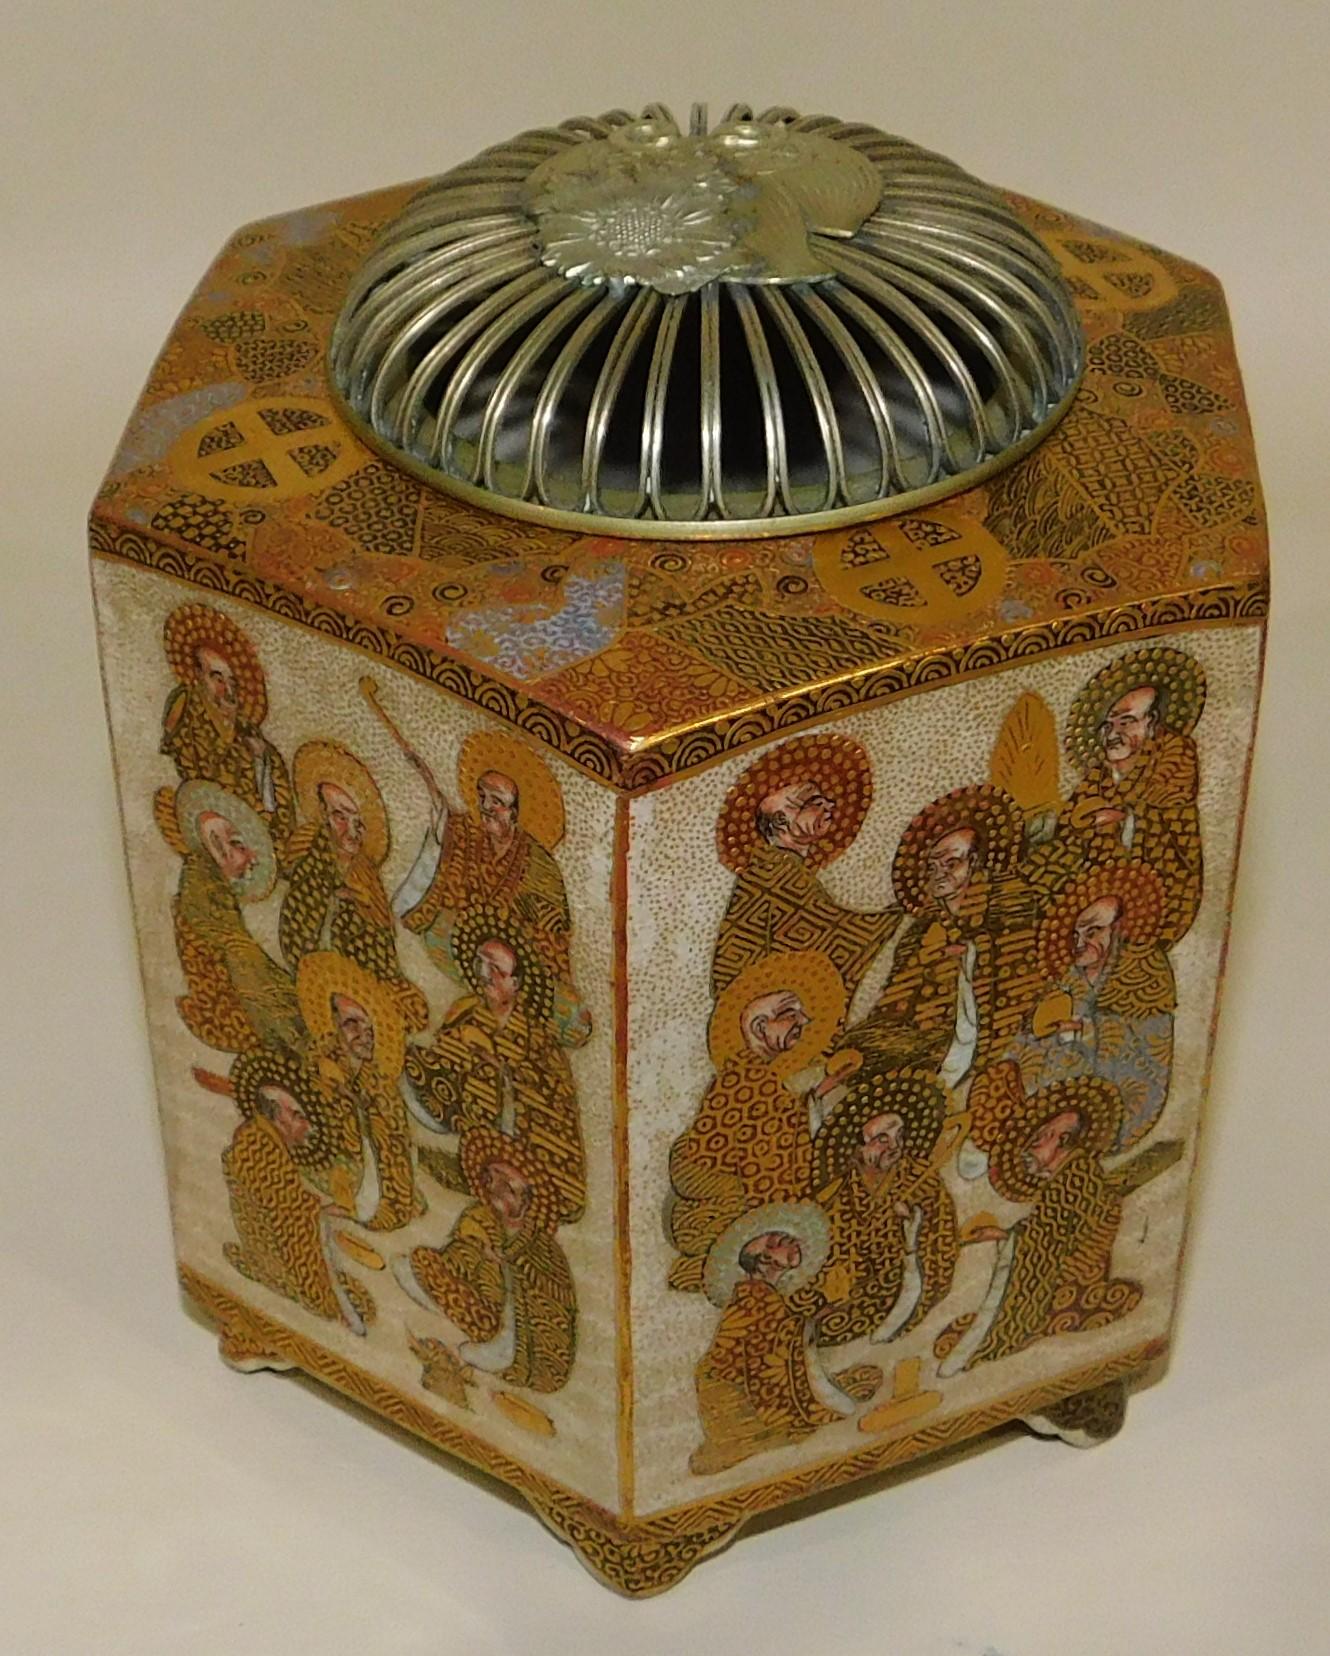 Japanese Satsuma Koro incense burner with a silver lid, circa 1919. Five sided with gold trimming, with a silver screen top.